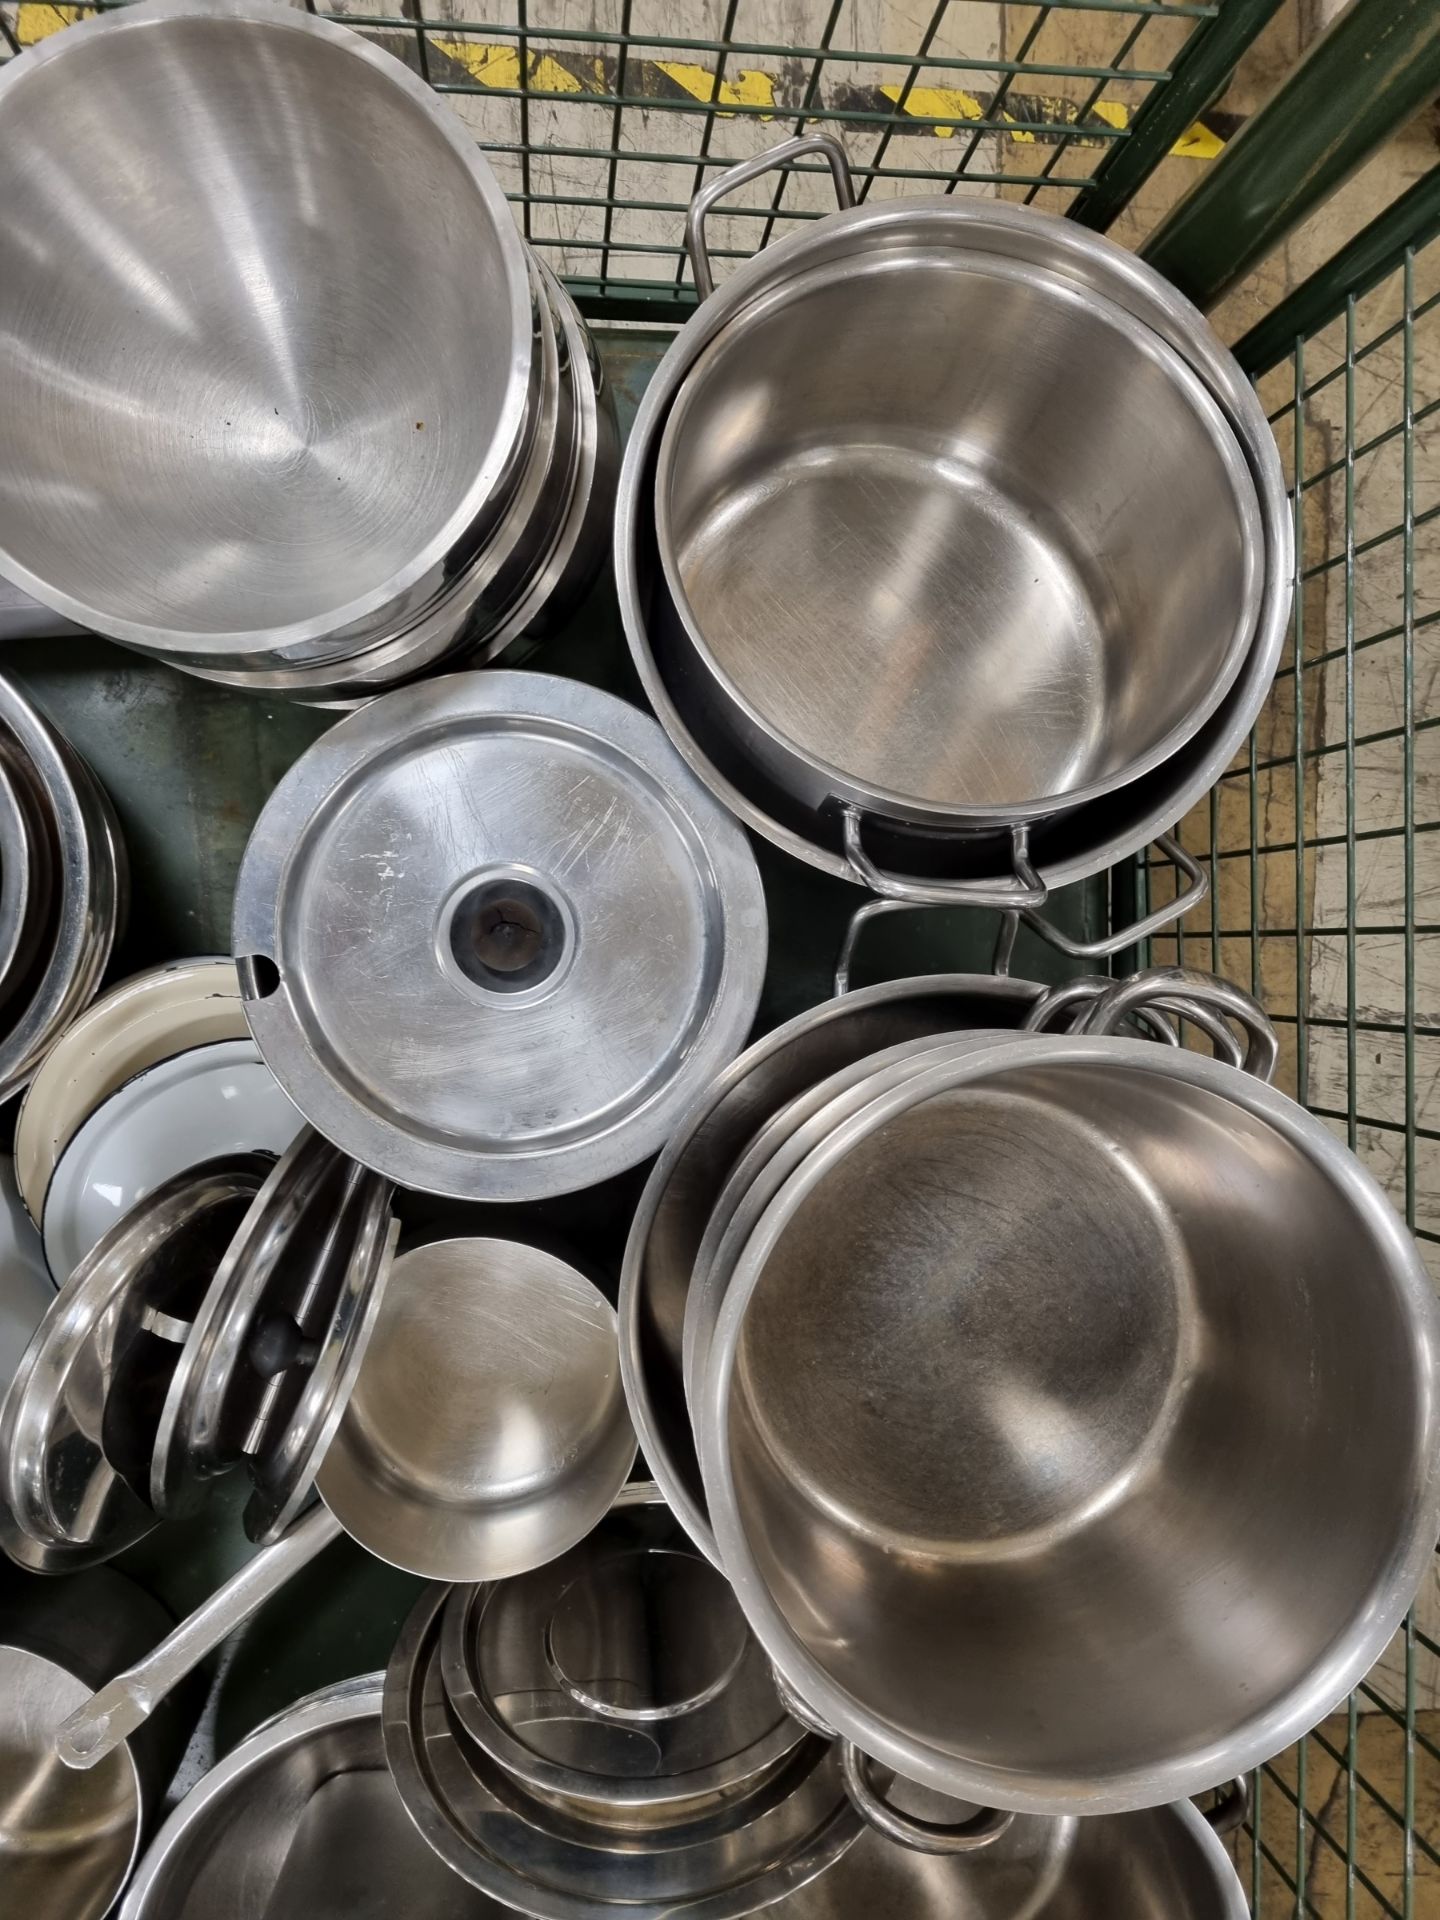 Catering equipment and supplies consisting of stainless steel pots, pans, bowls, containers - Image 6 of 6